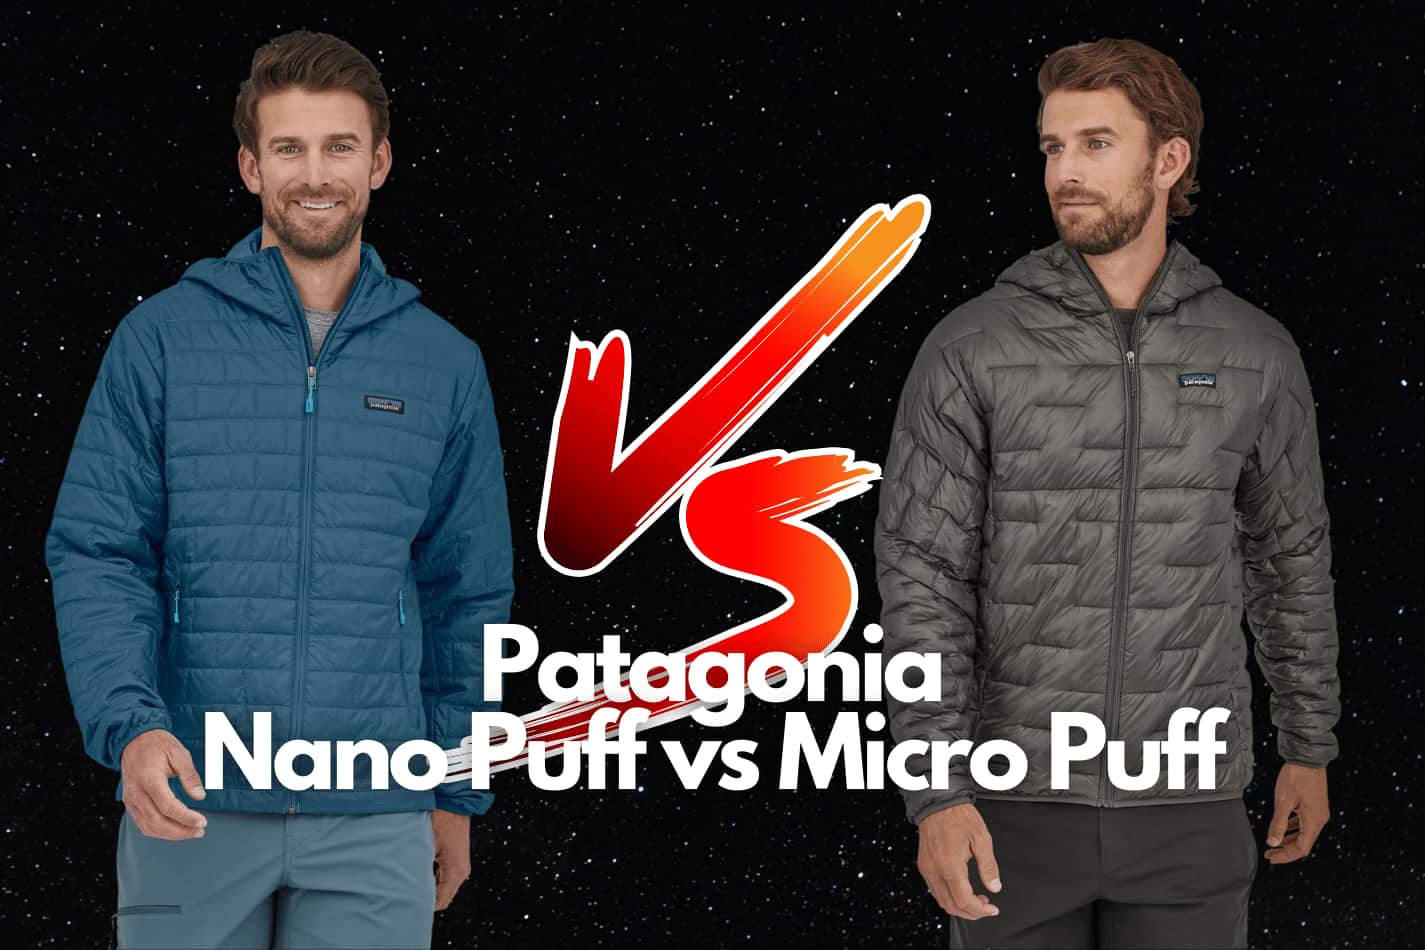 two people one in a nano puffy and one in a micro puffy jacket with a versus sign between them